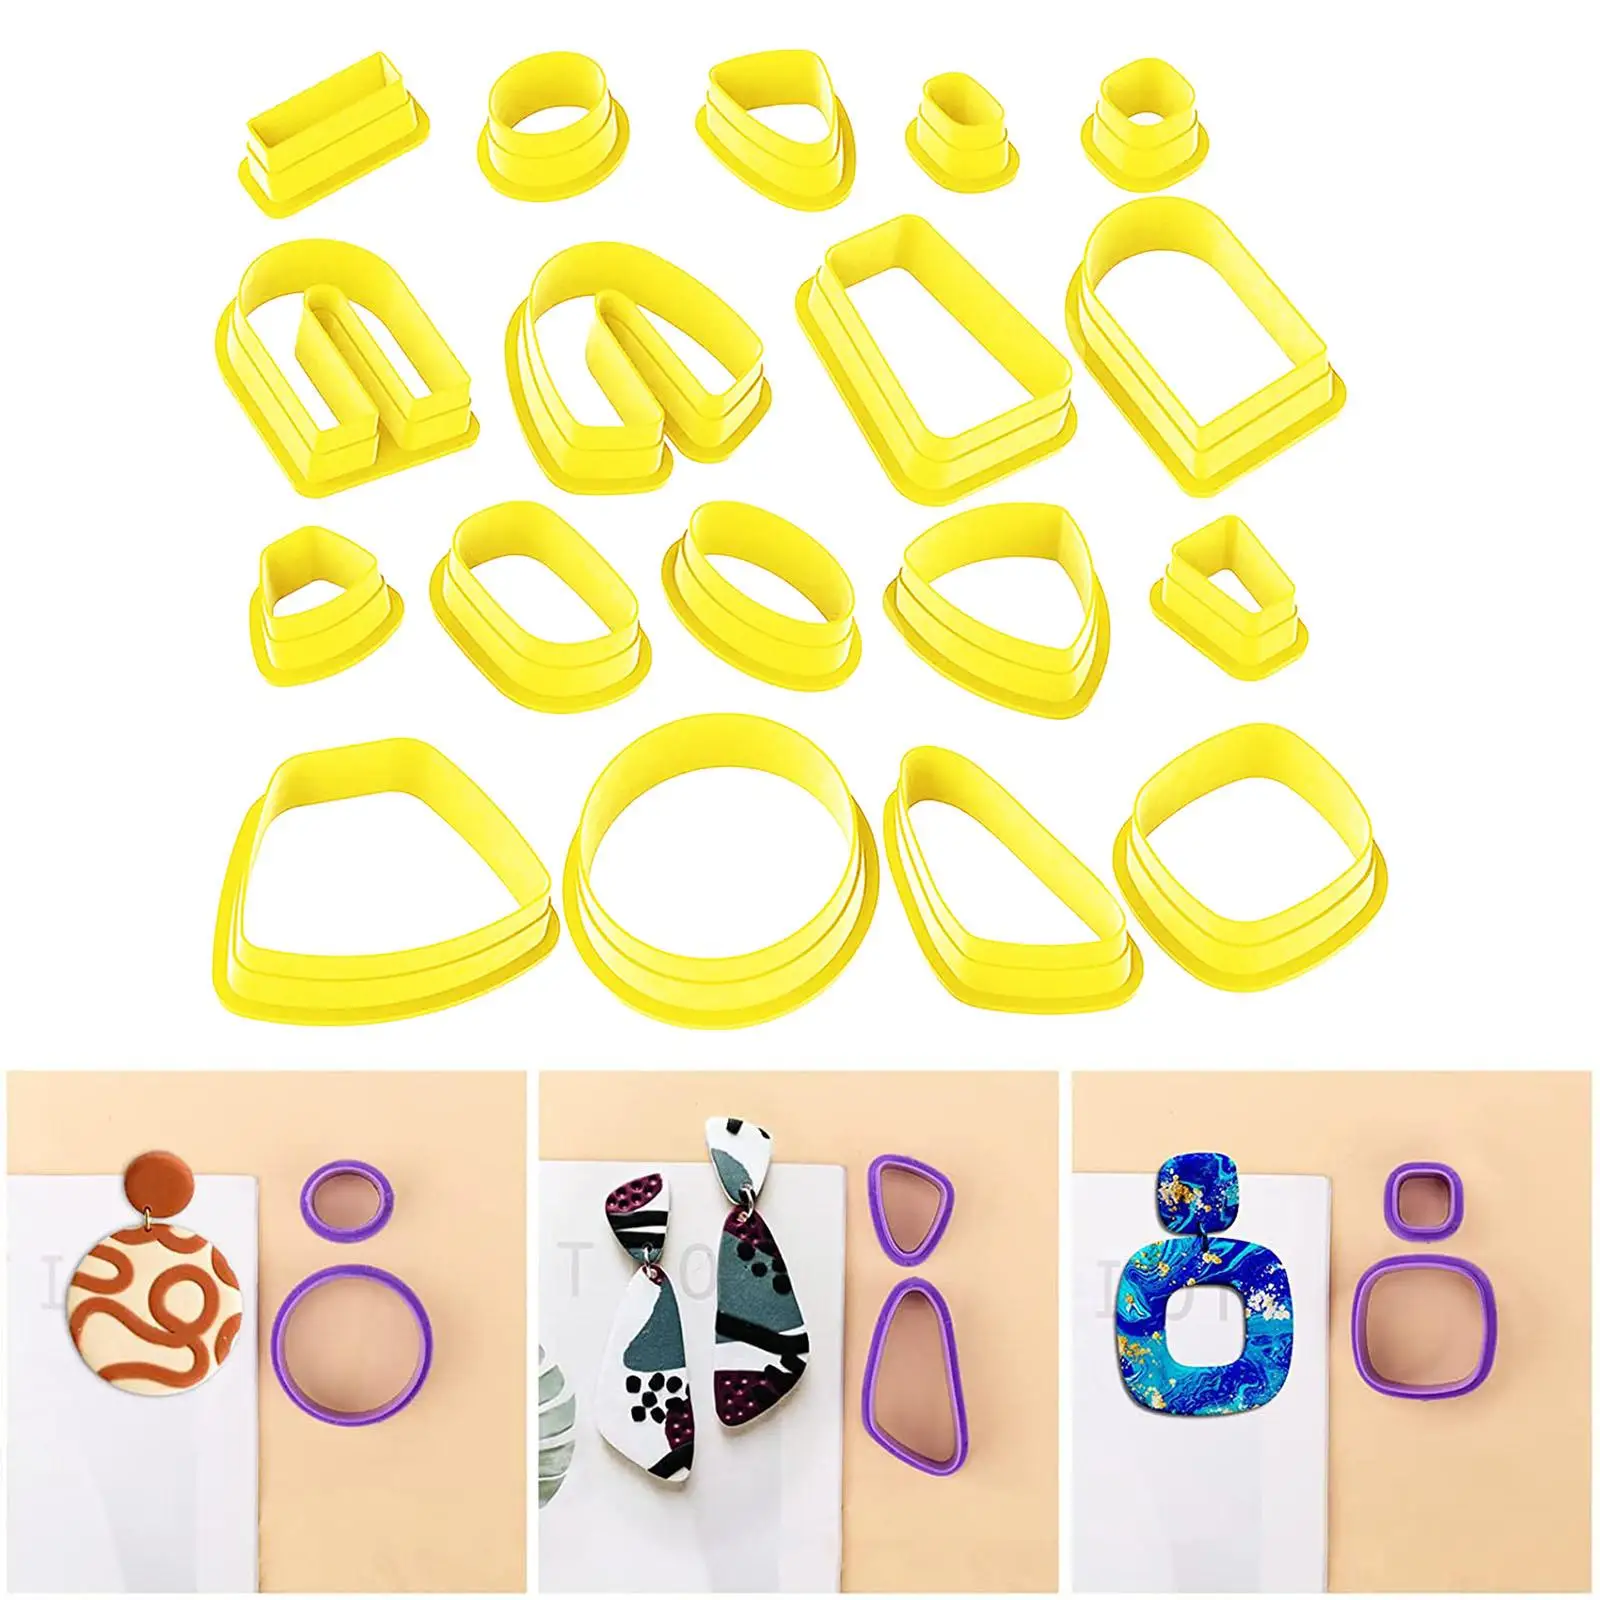 18 Pieces Polymer Clay Cutters Earrings Crafts Kids Polymer Clay Jewelry Clay Tools